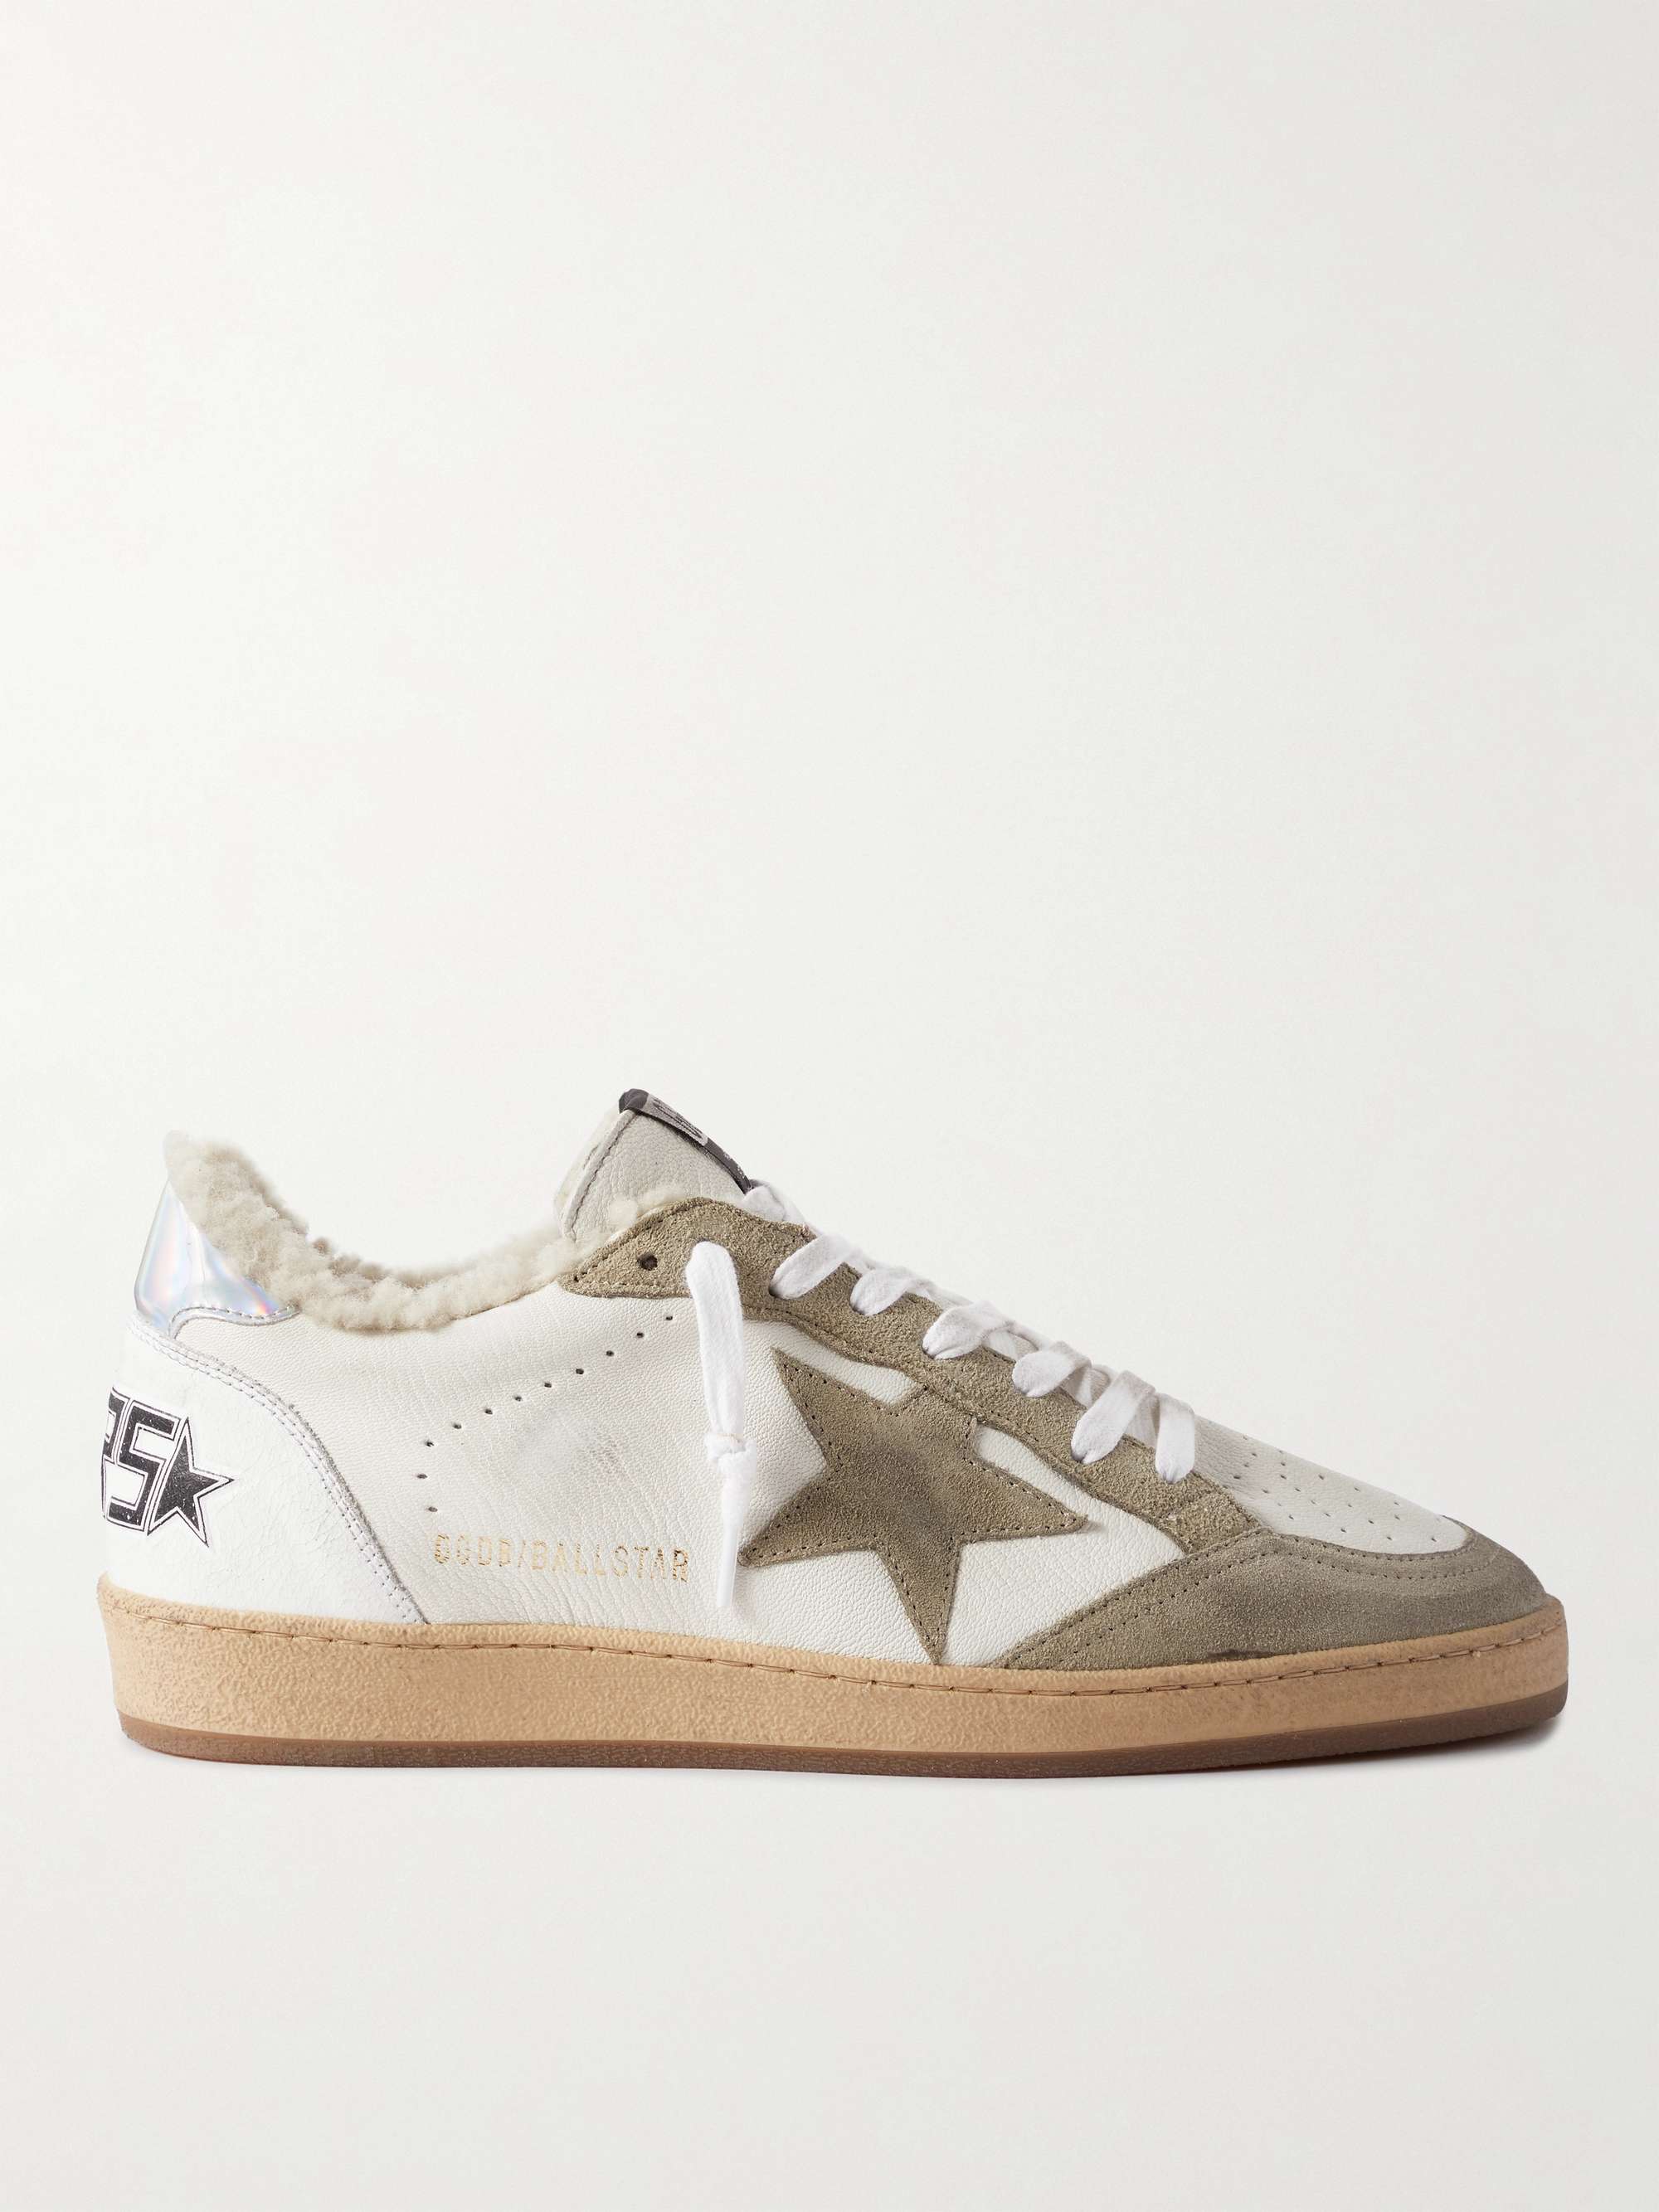 GOLDEN GOOSE DELUXE BRAND Ball Star Shearling-Lined Distressed Leather and  Suede Sneakers | MR PORTER